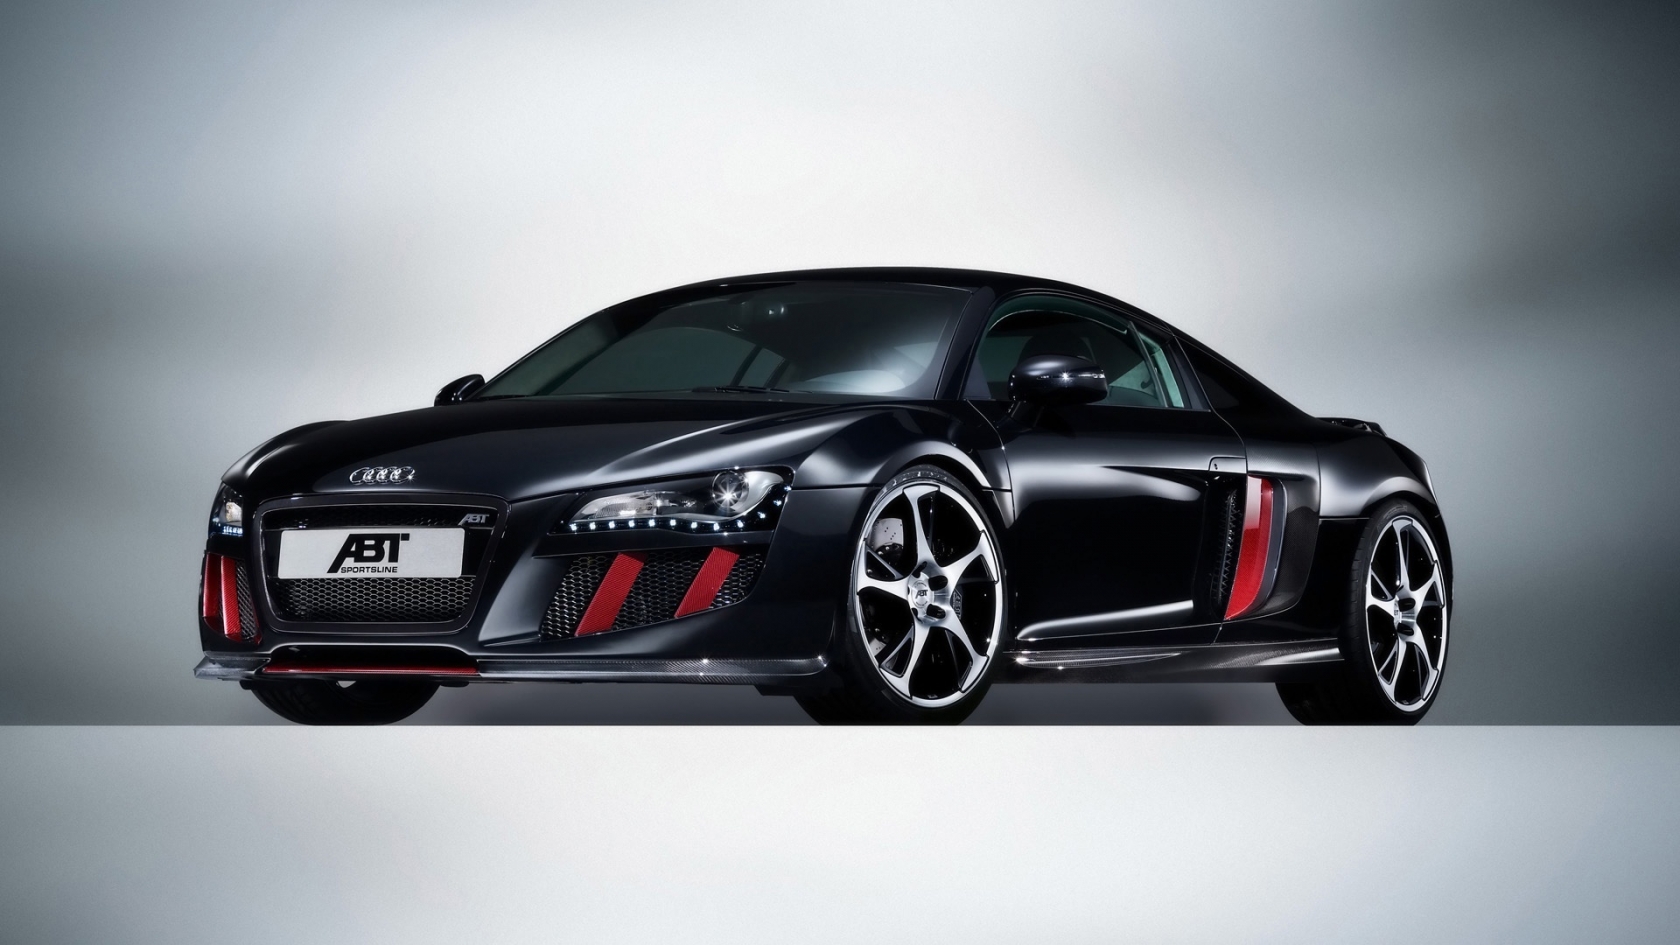 2008 Abt Audi R8 - Front Angle Lights for 1680 x 945 HDTV resolution